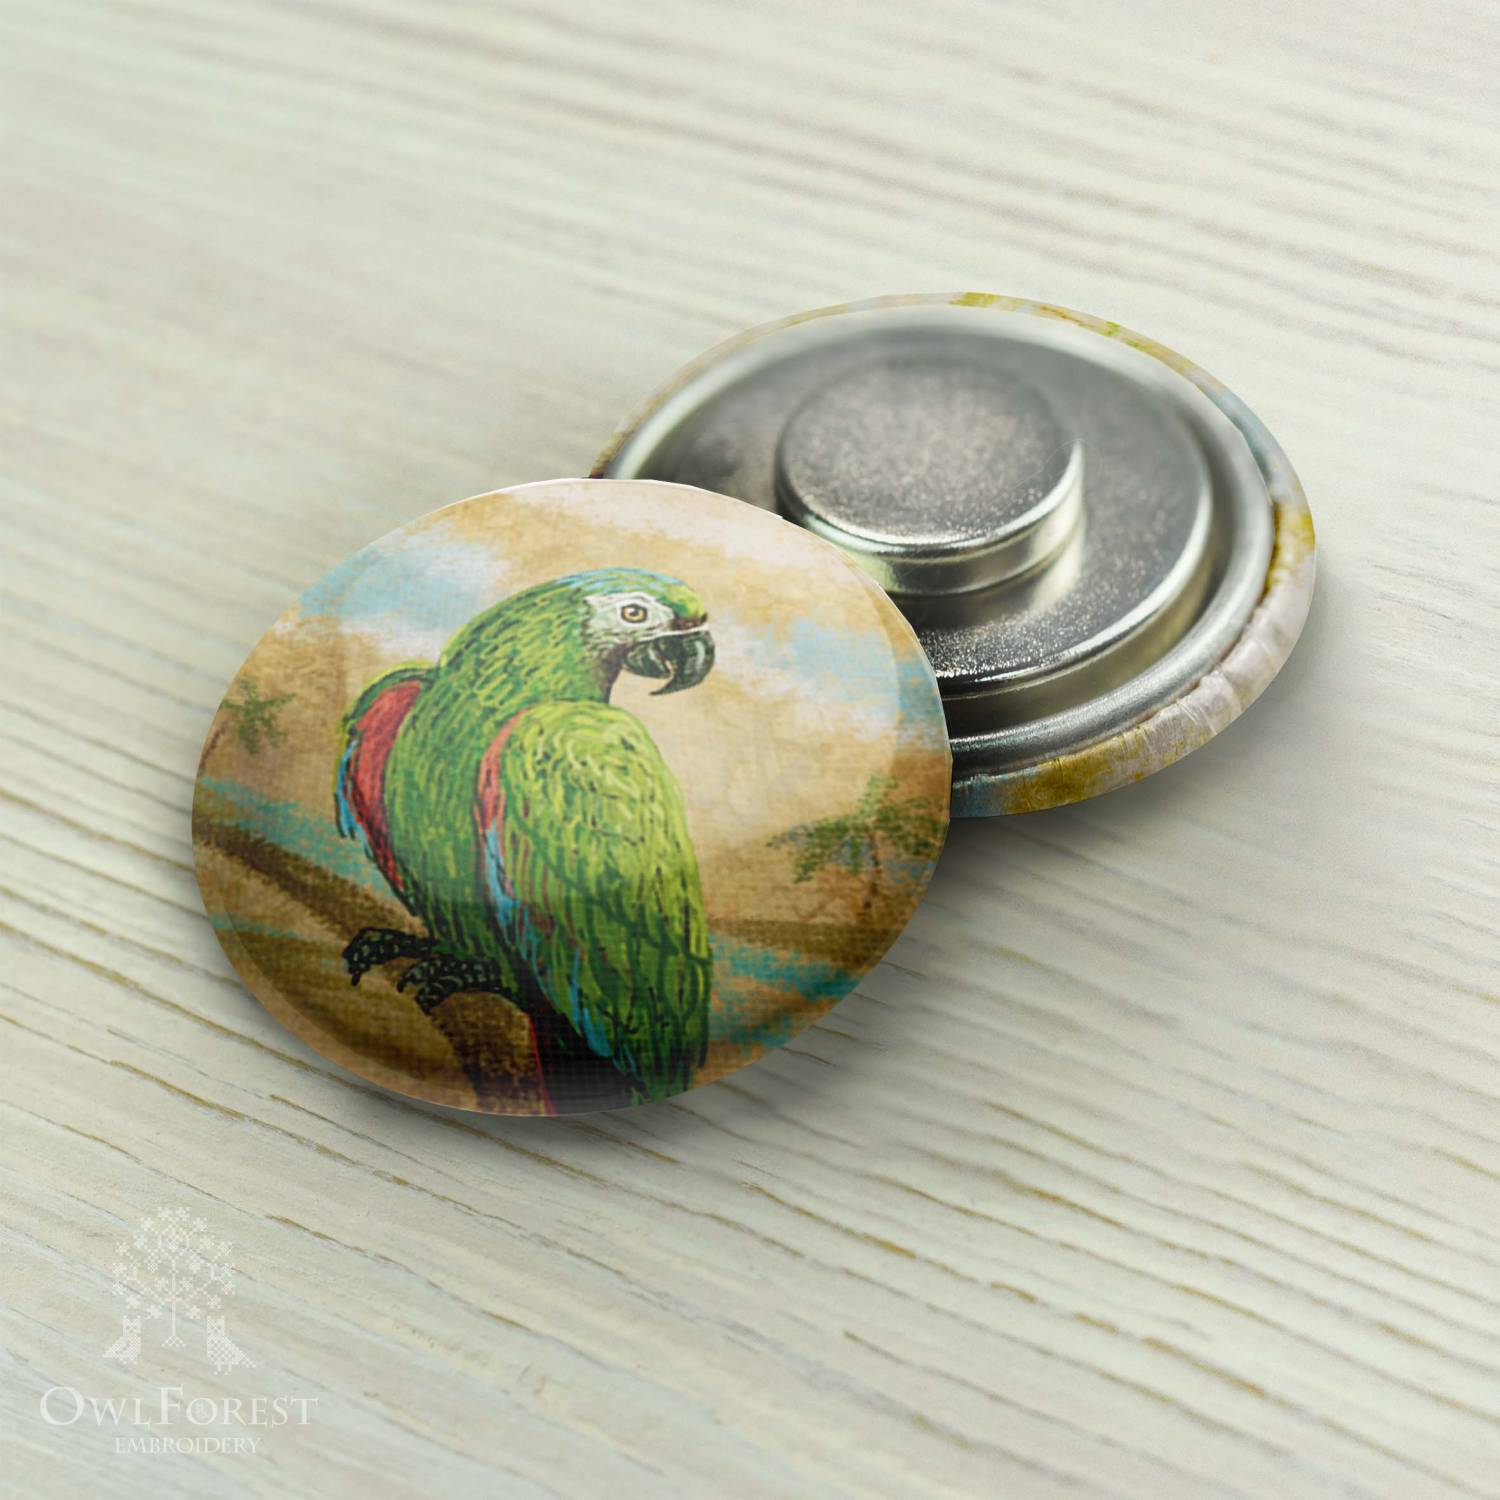 Magnet Needle Minder “Parrot” – Owlforest Embroidery